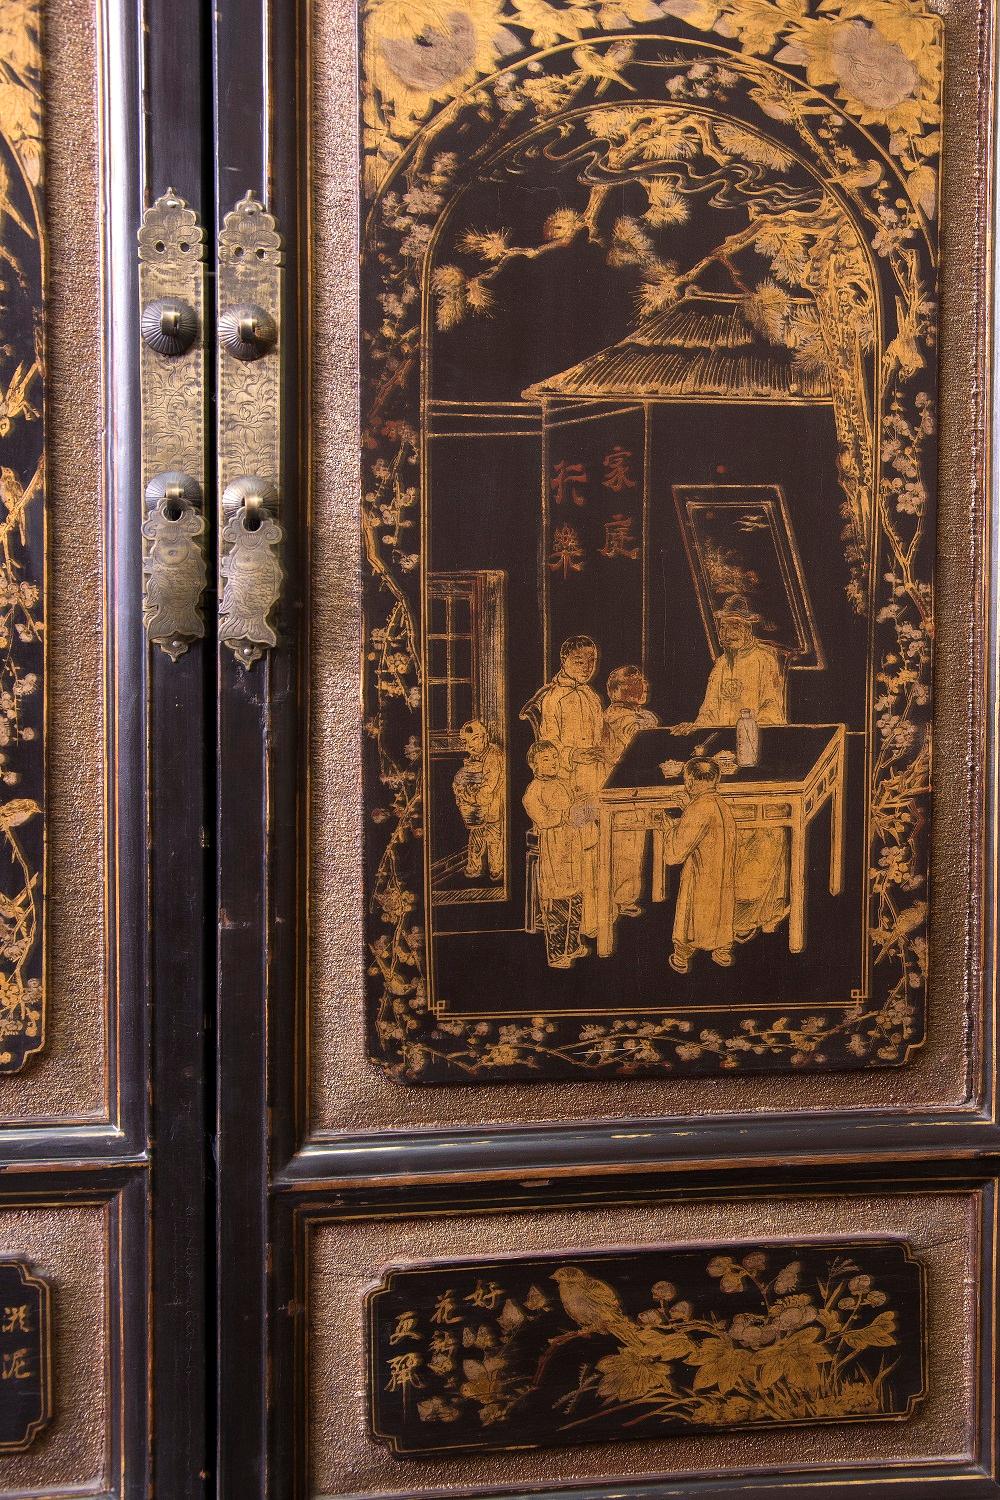 Wardrobe with two bodies, with two doors and two drawers in each (larger the upper ones), decorated on the sides with red stripes framing rectangular areas in dark tone, and, on the front, with pieces of lacquered wood with figurative scenes and